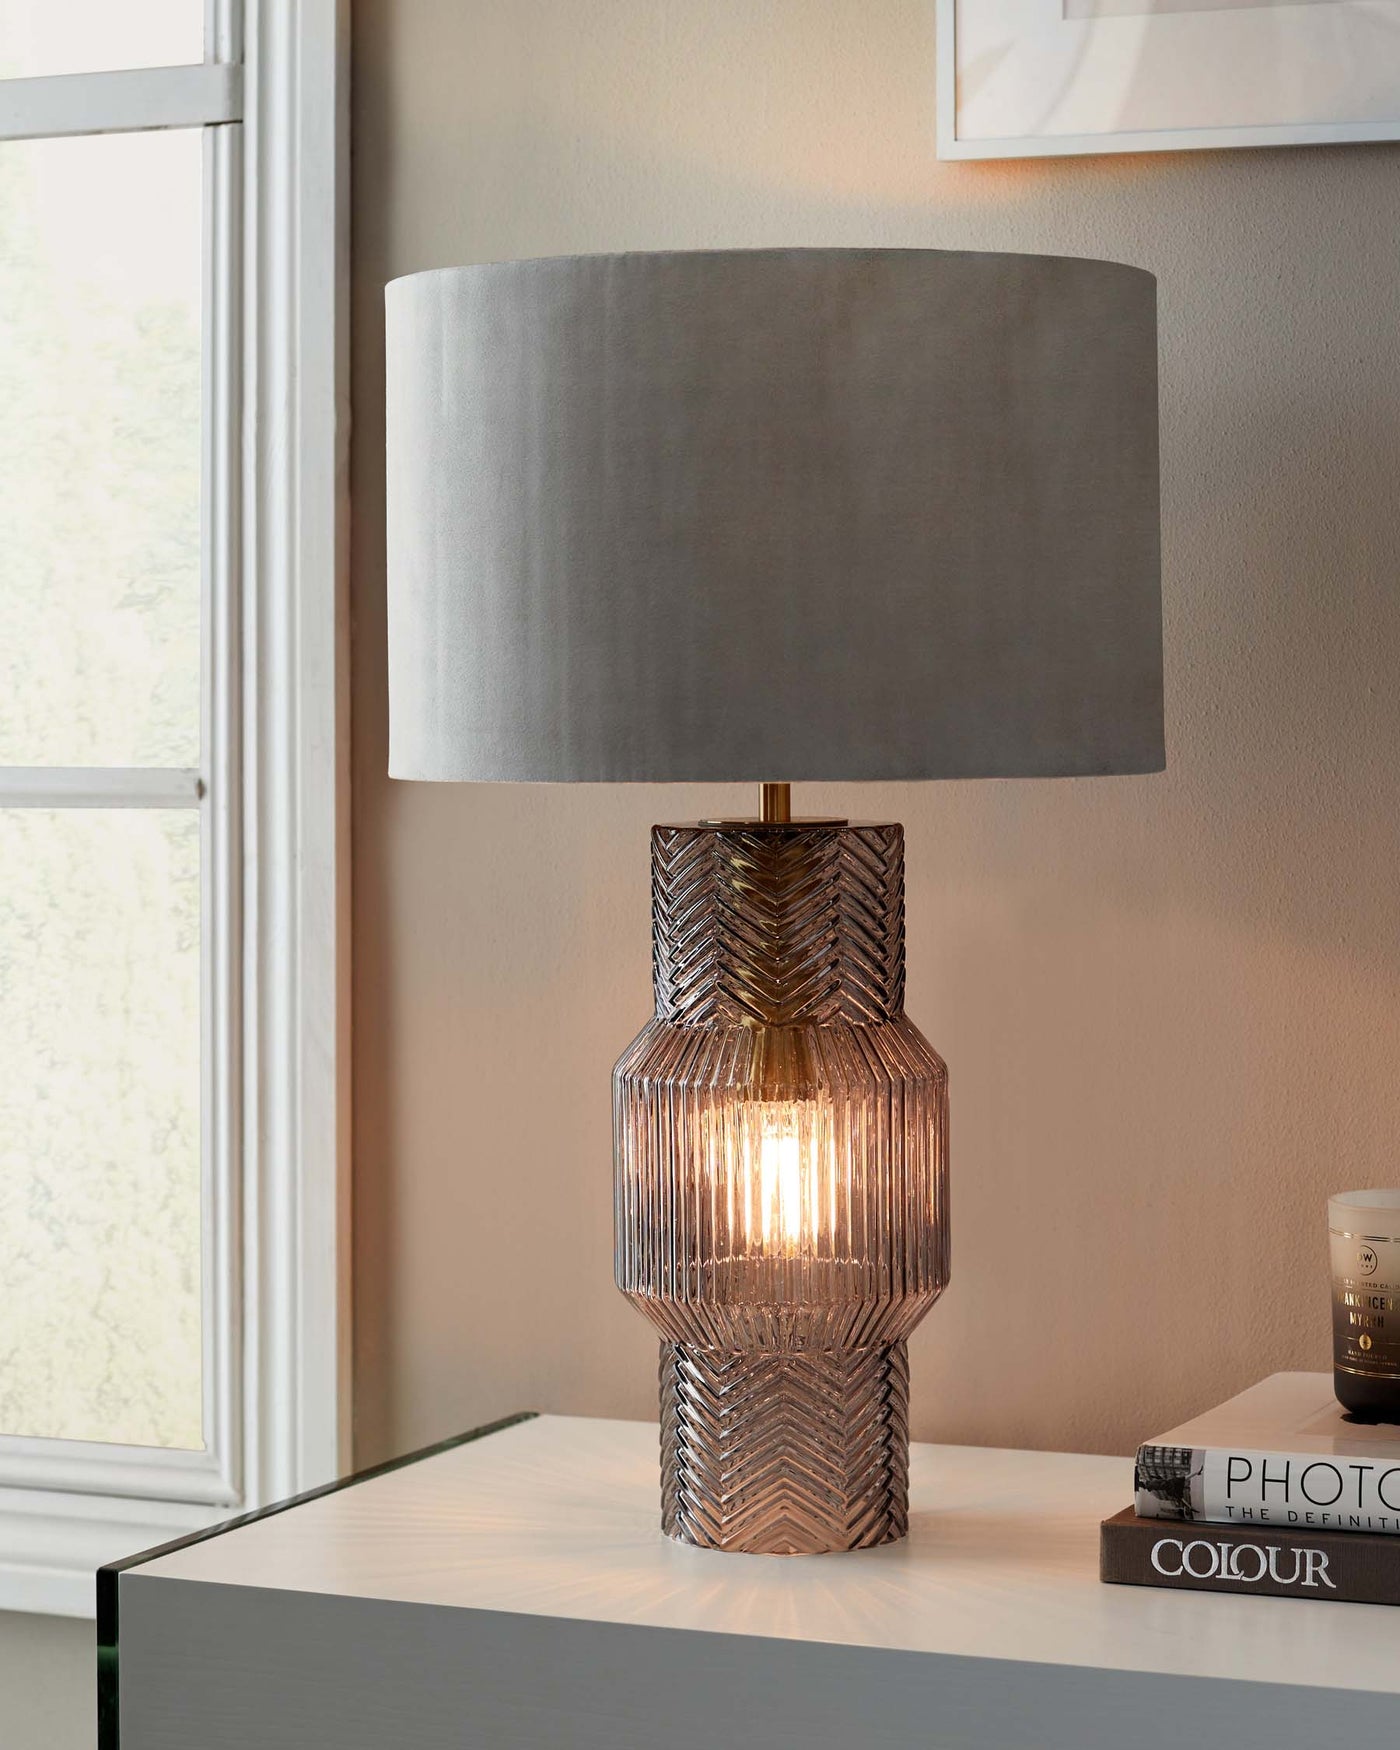 Elegant table lamp with a textured metallic body and a grey cylindrical fabric shade, displayed on a minimalist high-gloss white side table, evoking a modern aesthetic.